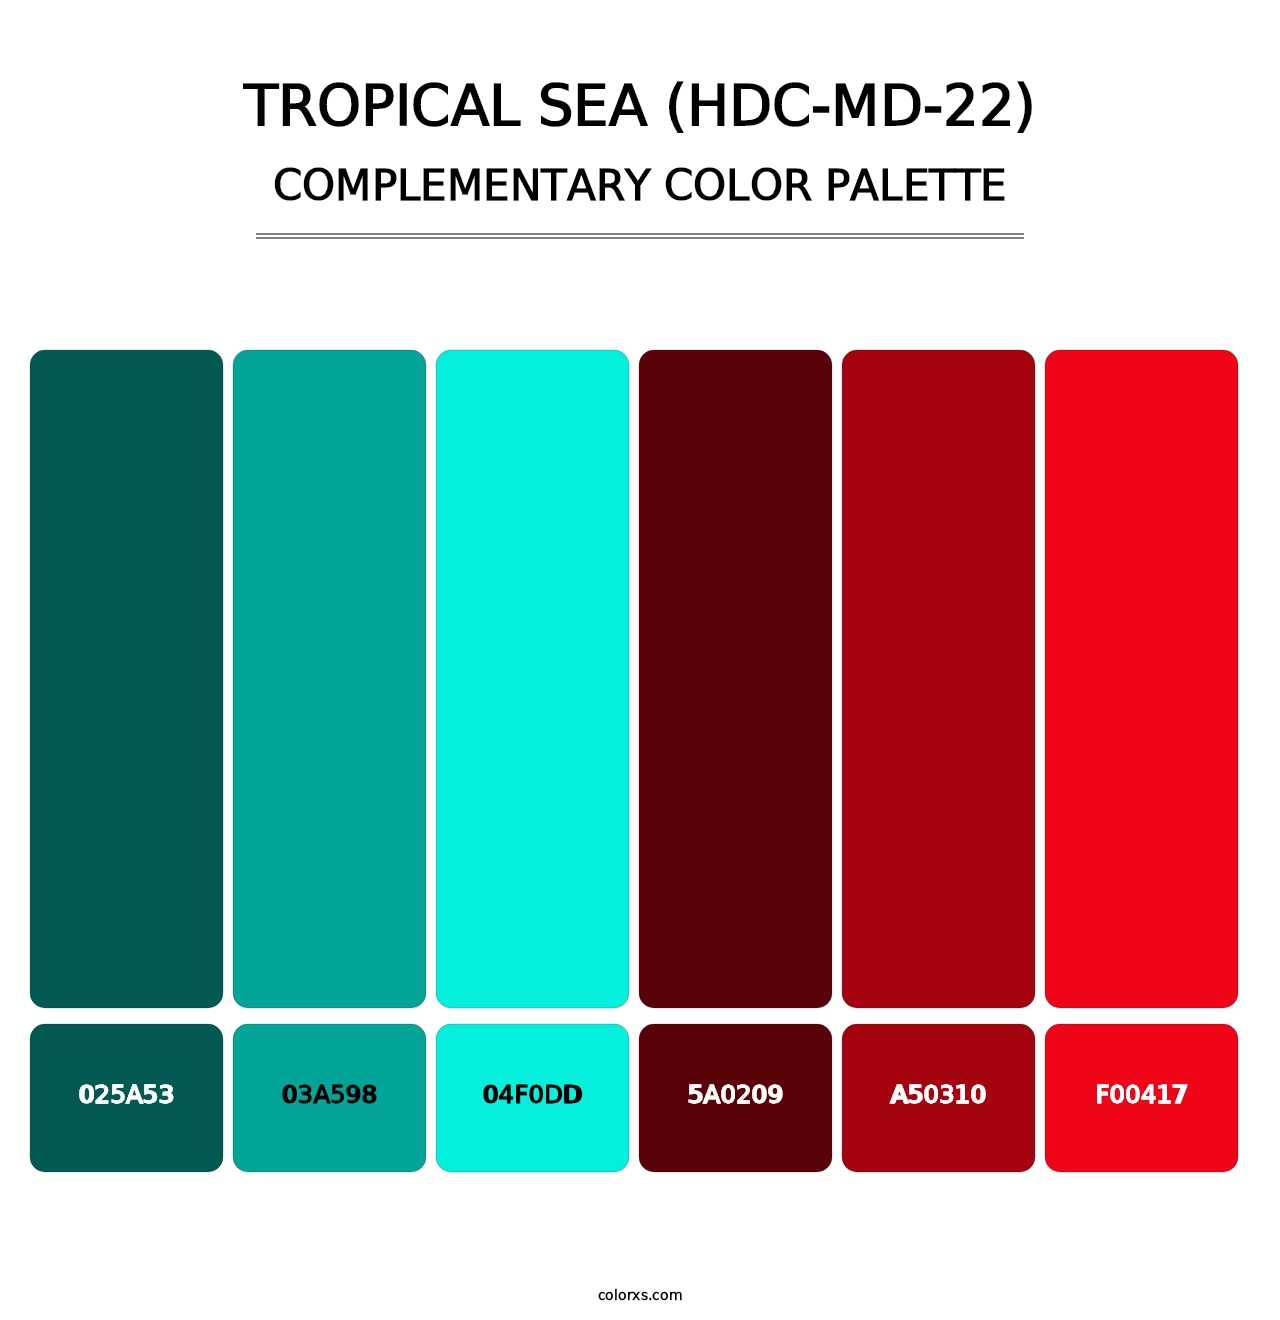 Tropical Sea (HDC-MD-22) - Complementary Color Palette